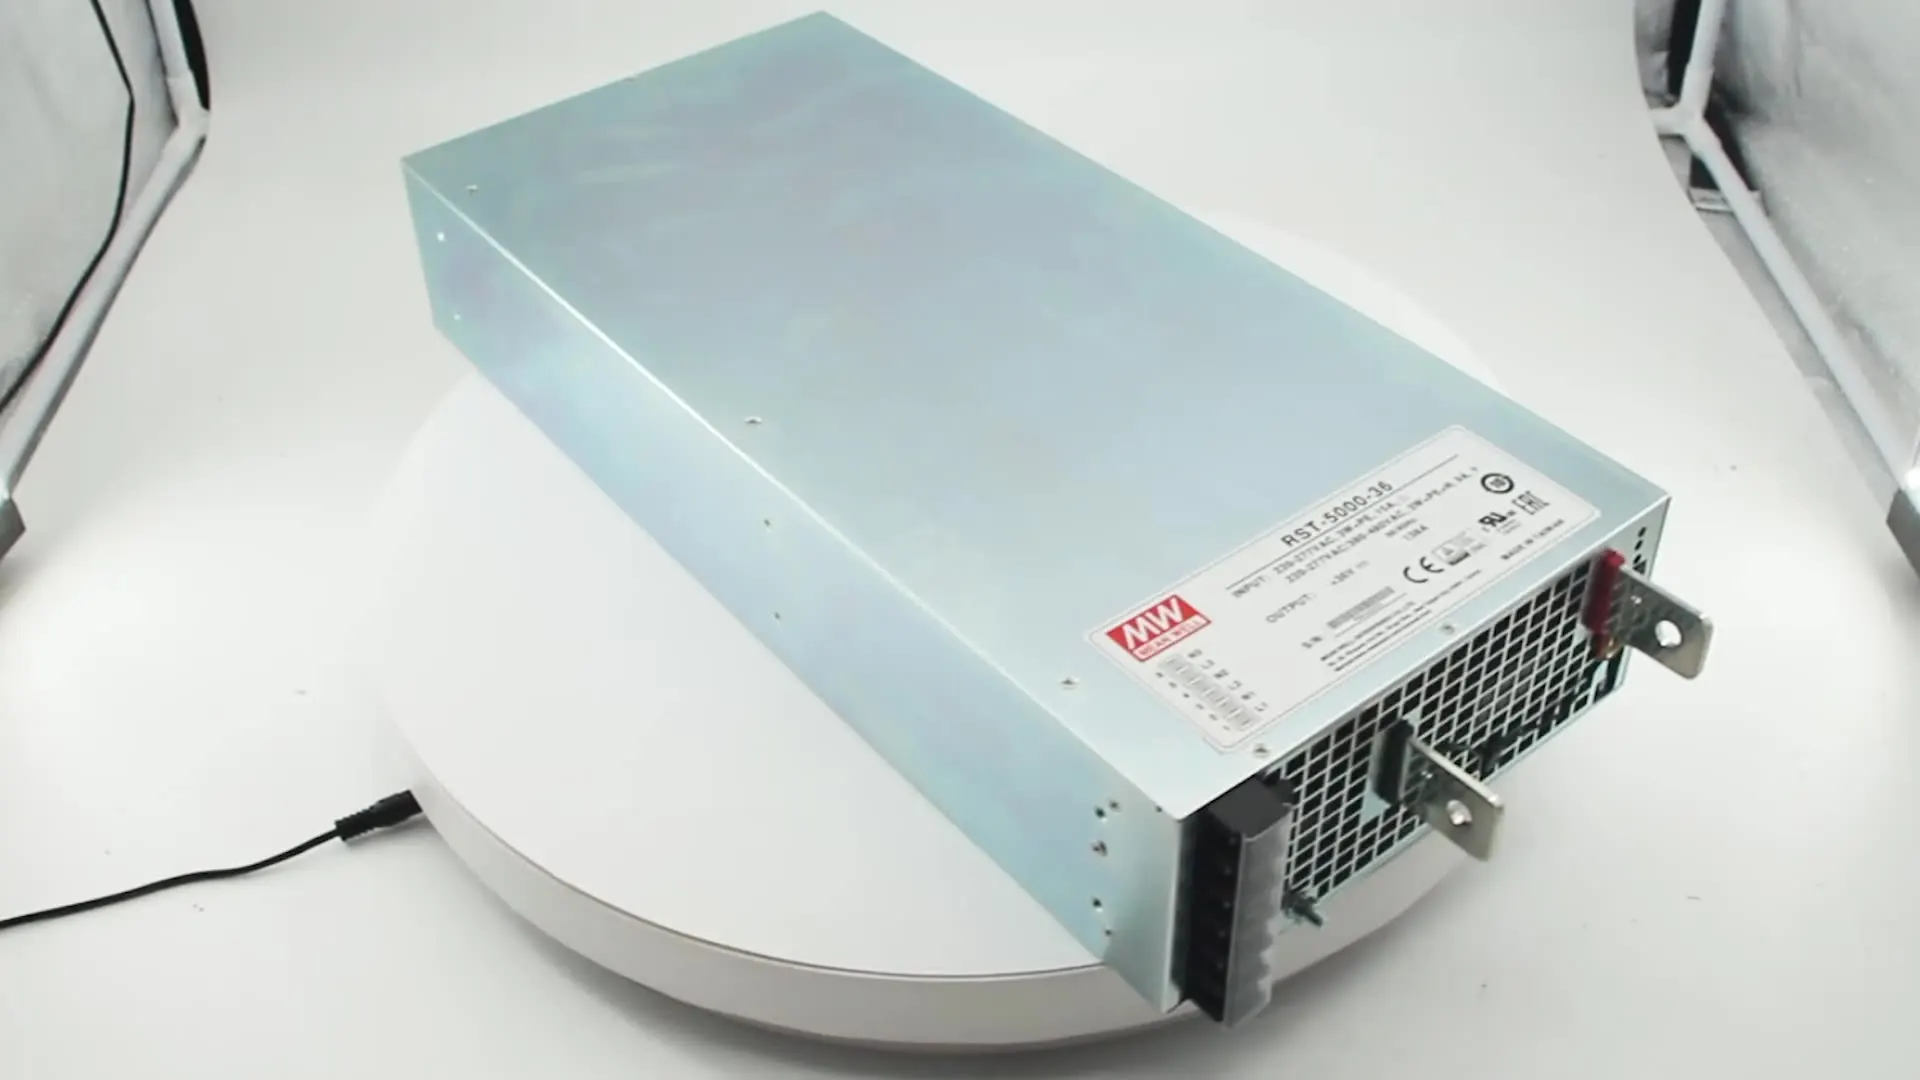 

Meanwell RST-5000-48 smps 48V 105A 5000W Built-in Active PFC Function For RP Application Switching Power Supply 48V